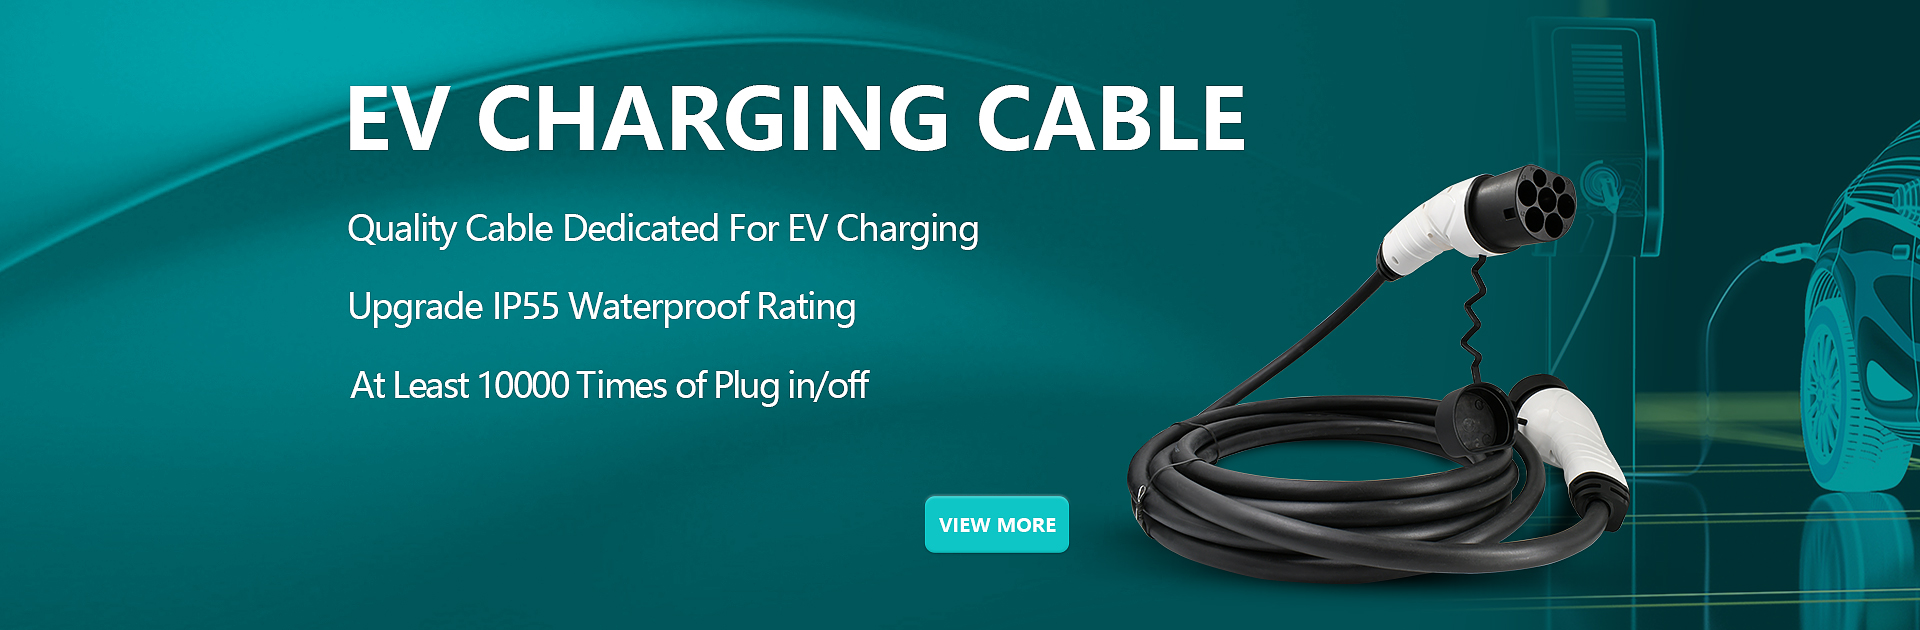 slocable ev them cable banner